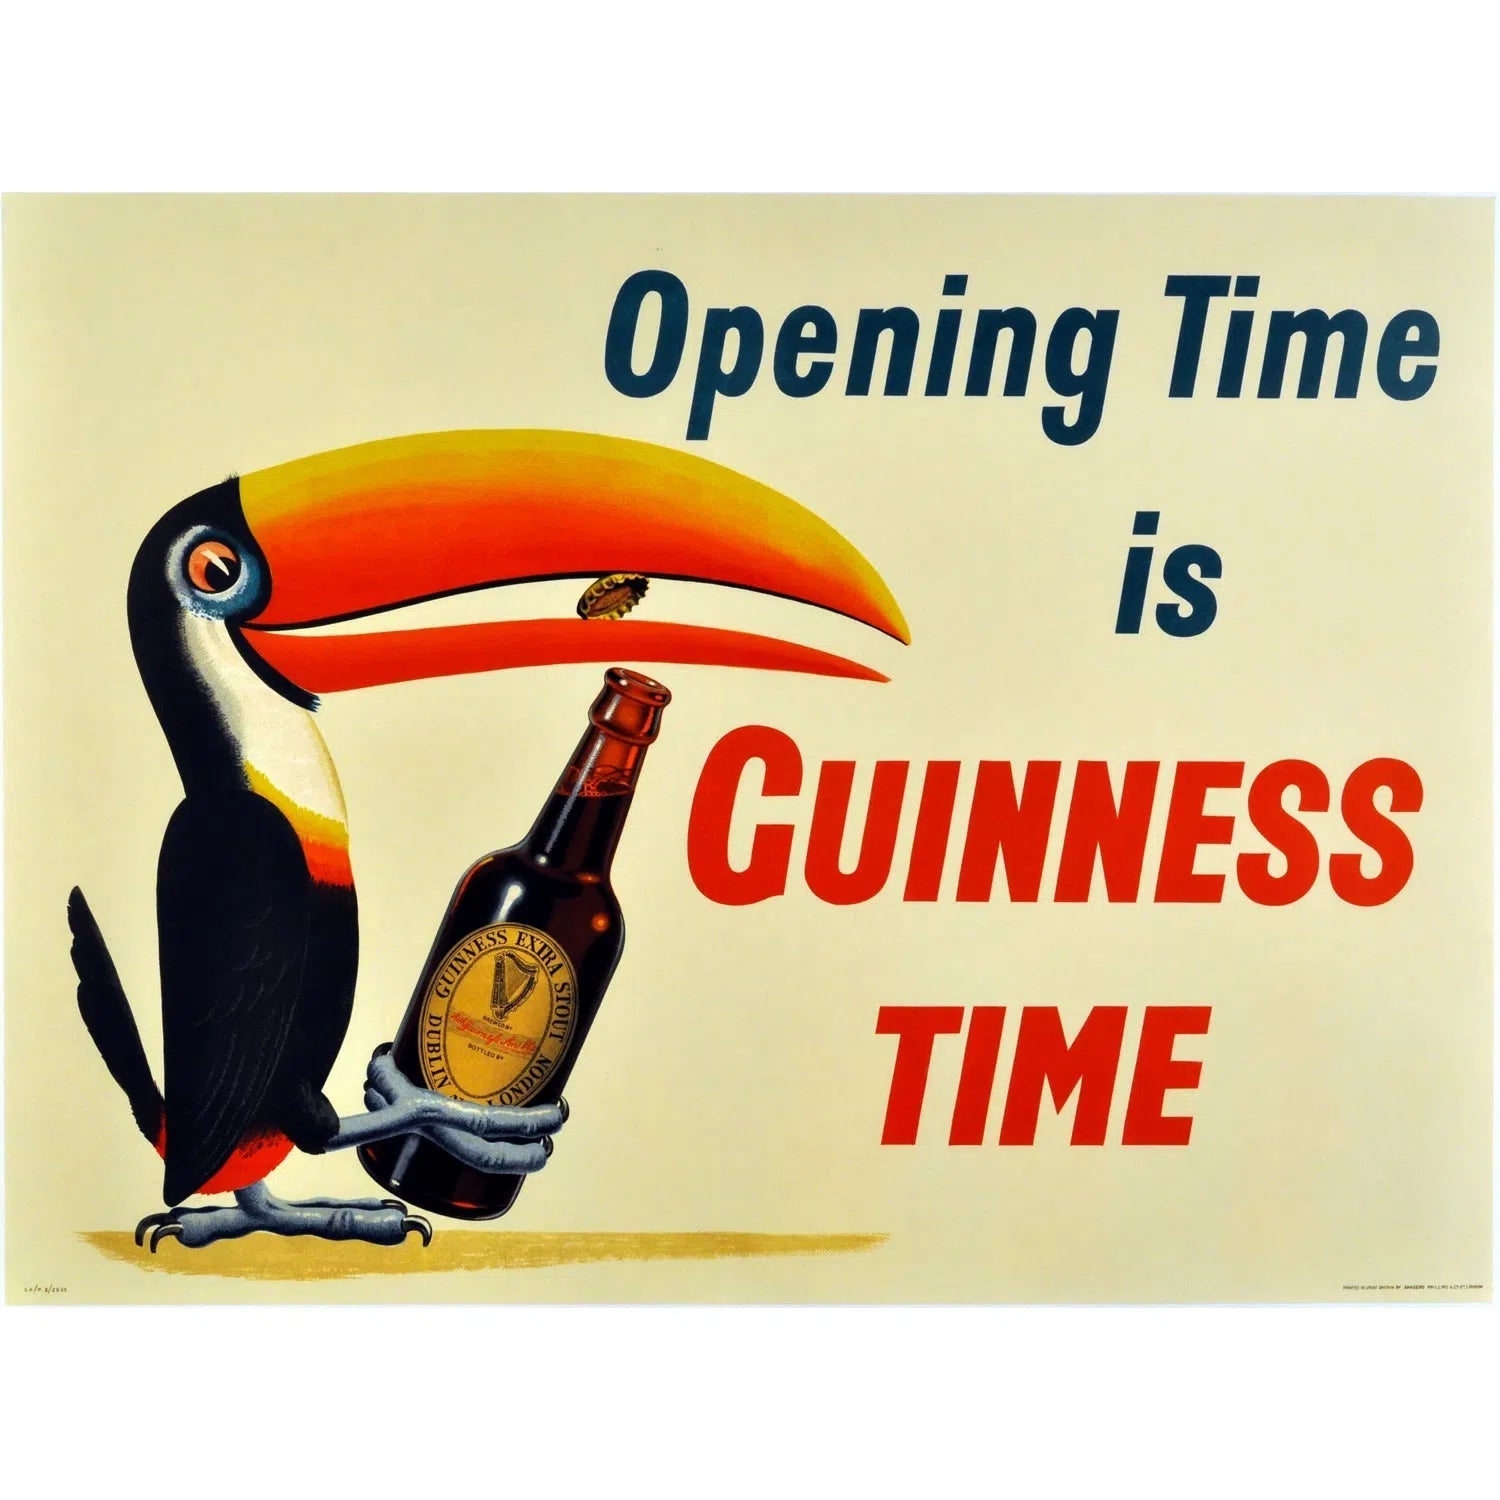 Opening time is Guinness time-Imagesdartistes